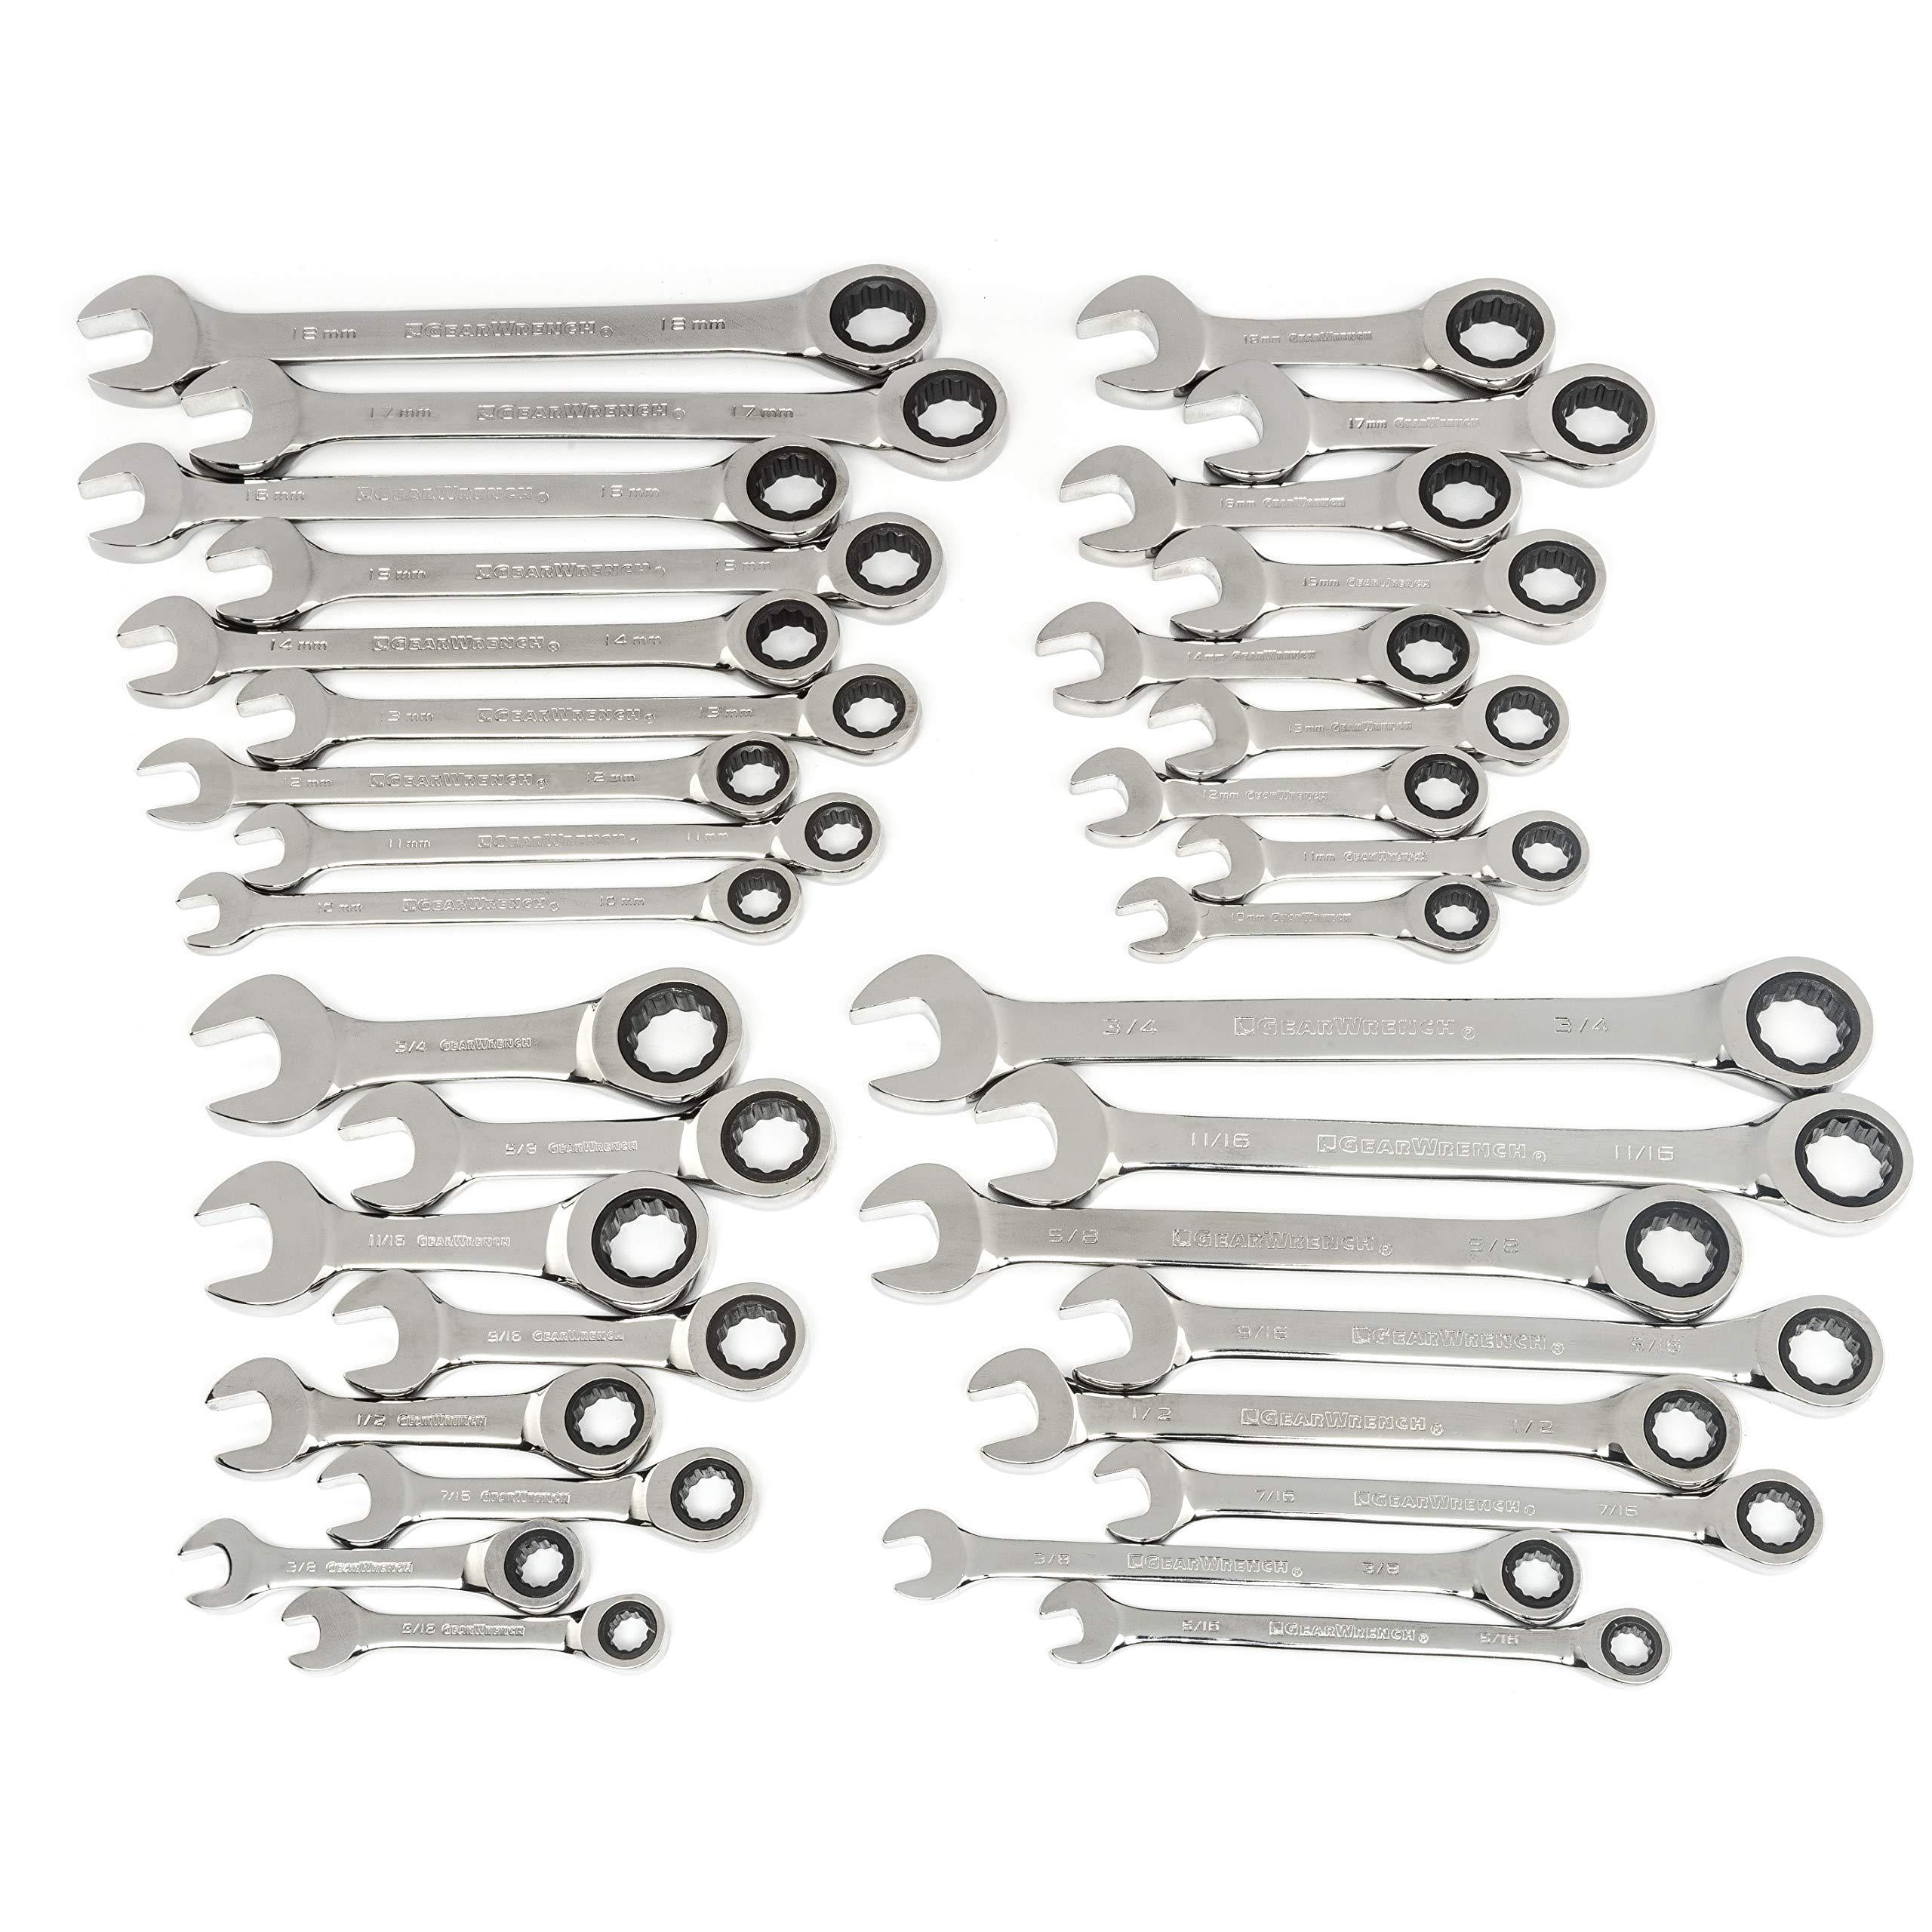 4 Pc Heavy Duty Gear Wrench 9601 Metric Rev Combination Ratcheting Wrench Set 